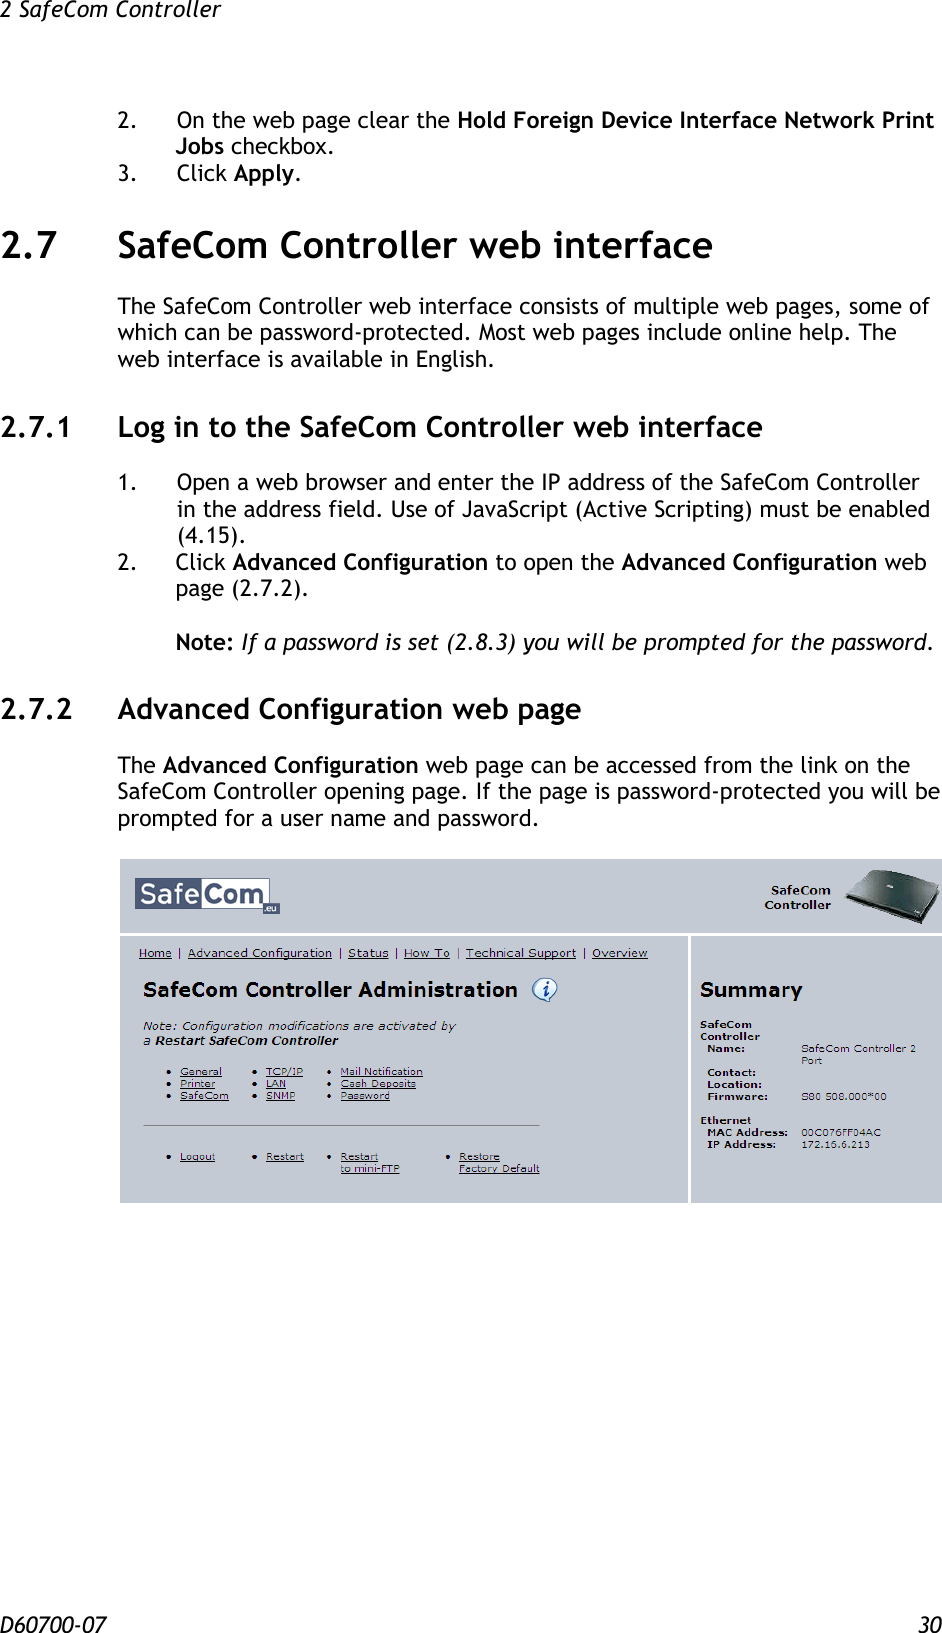 2 SafeCom Controller  D60700-07 30 2.    On the web page clear the Hold Foreign Device Interface Network Print Jobs checkbox. 3.  Click Apply. 2.7 SafeCom Controller web interface The SafeCom Controller web interface consists of multiple web pages, some of which can be password-protected. Most web pages include online help. The web interface is available in English. 2.7.1 Log in to the SafeCom Controller web interface 1.  Open a web browser and enter the IP address of the SafeCom Controller in the address field. Use of JavaScript (Active Scripting) must be enabled (4.15). 2. Click Advanced Configuration to open the Advanced Configuration web page (2.7.2).  Note: If a password is set (2.8.3) you will be prompted for the password. 2.7.2 Advanced Configuration web page The Advanced Configuration web page can be accessed from the link on the SafeCom Controller opening page. If the page is password-protected you will be prompted for a user name and password.   